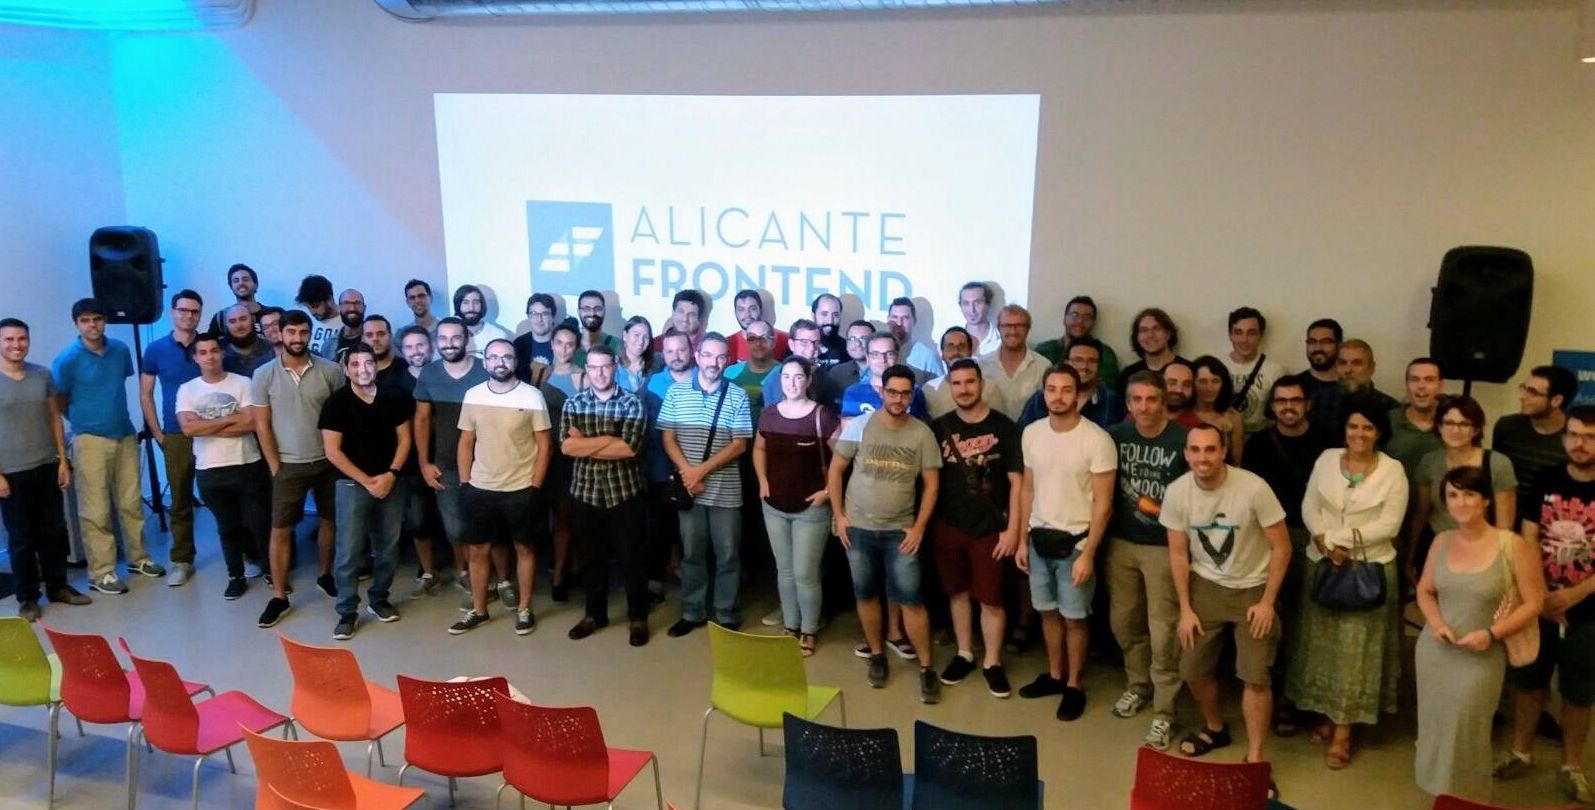 Alicante Frontend's people